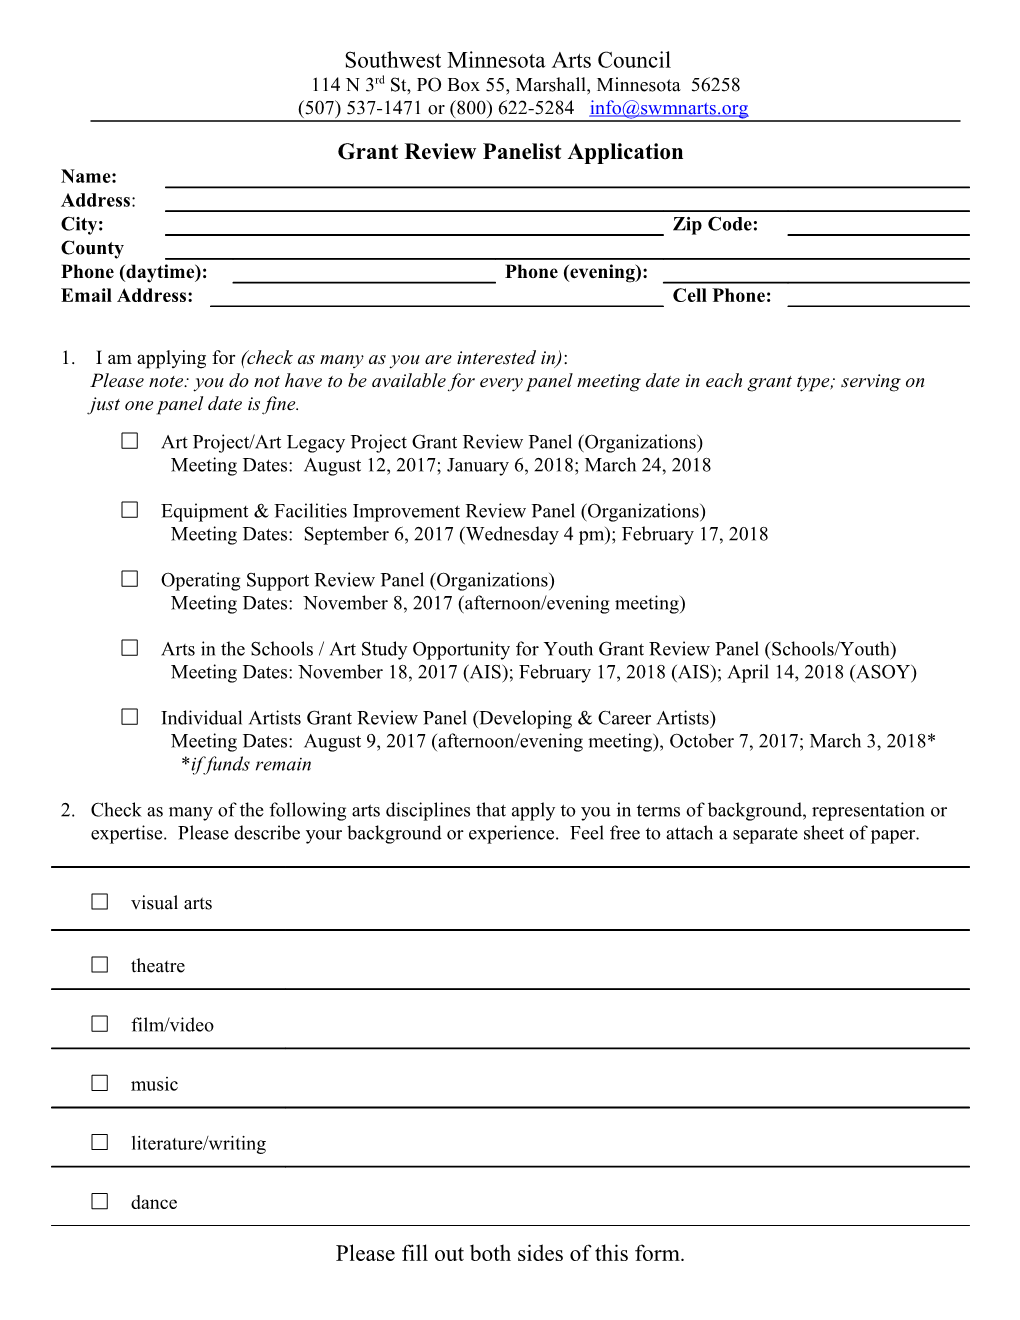 Application for Grant Review Panelist